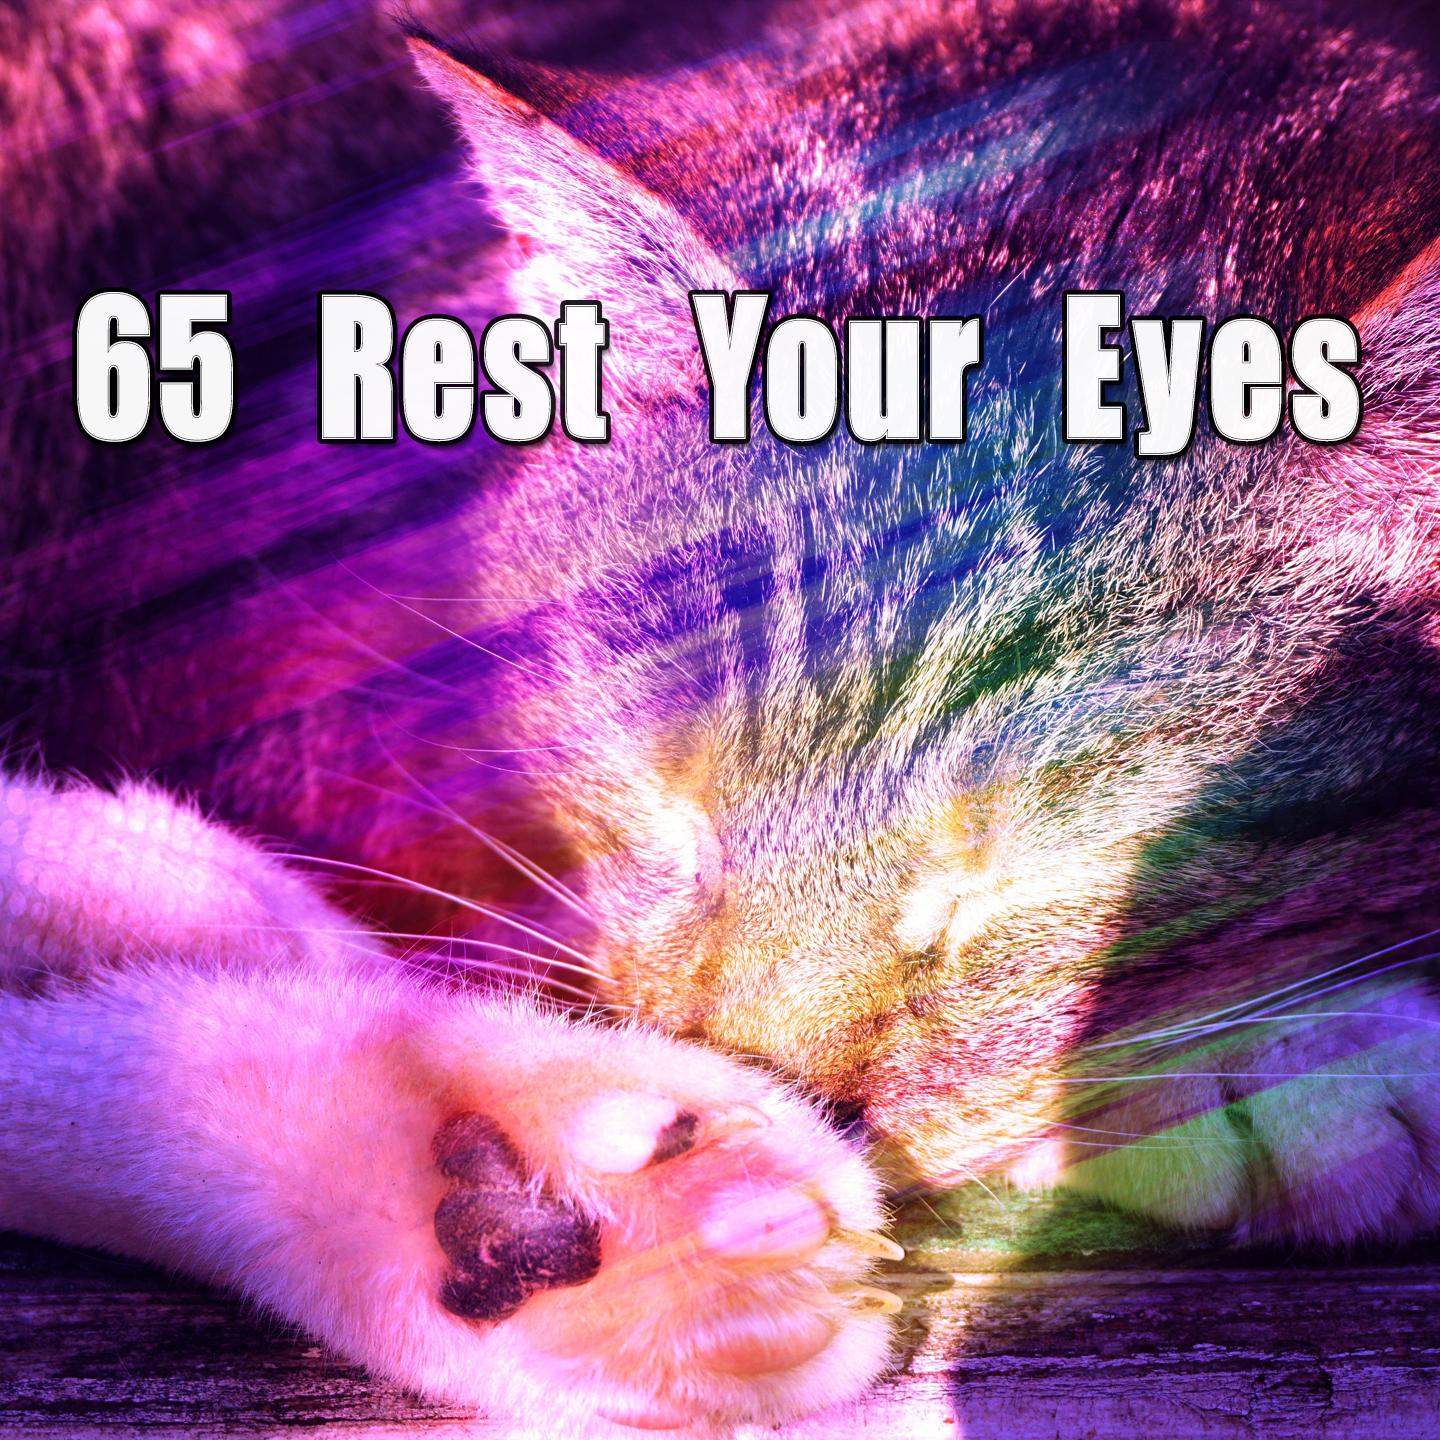 65 Rest Your Eyes